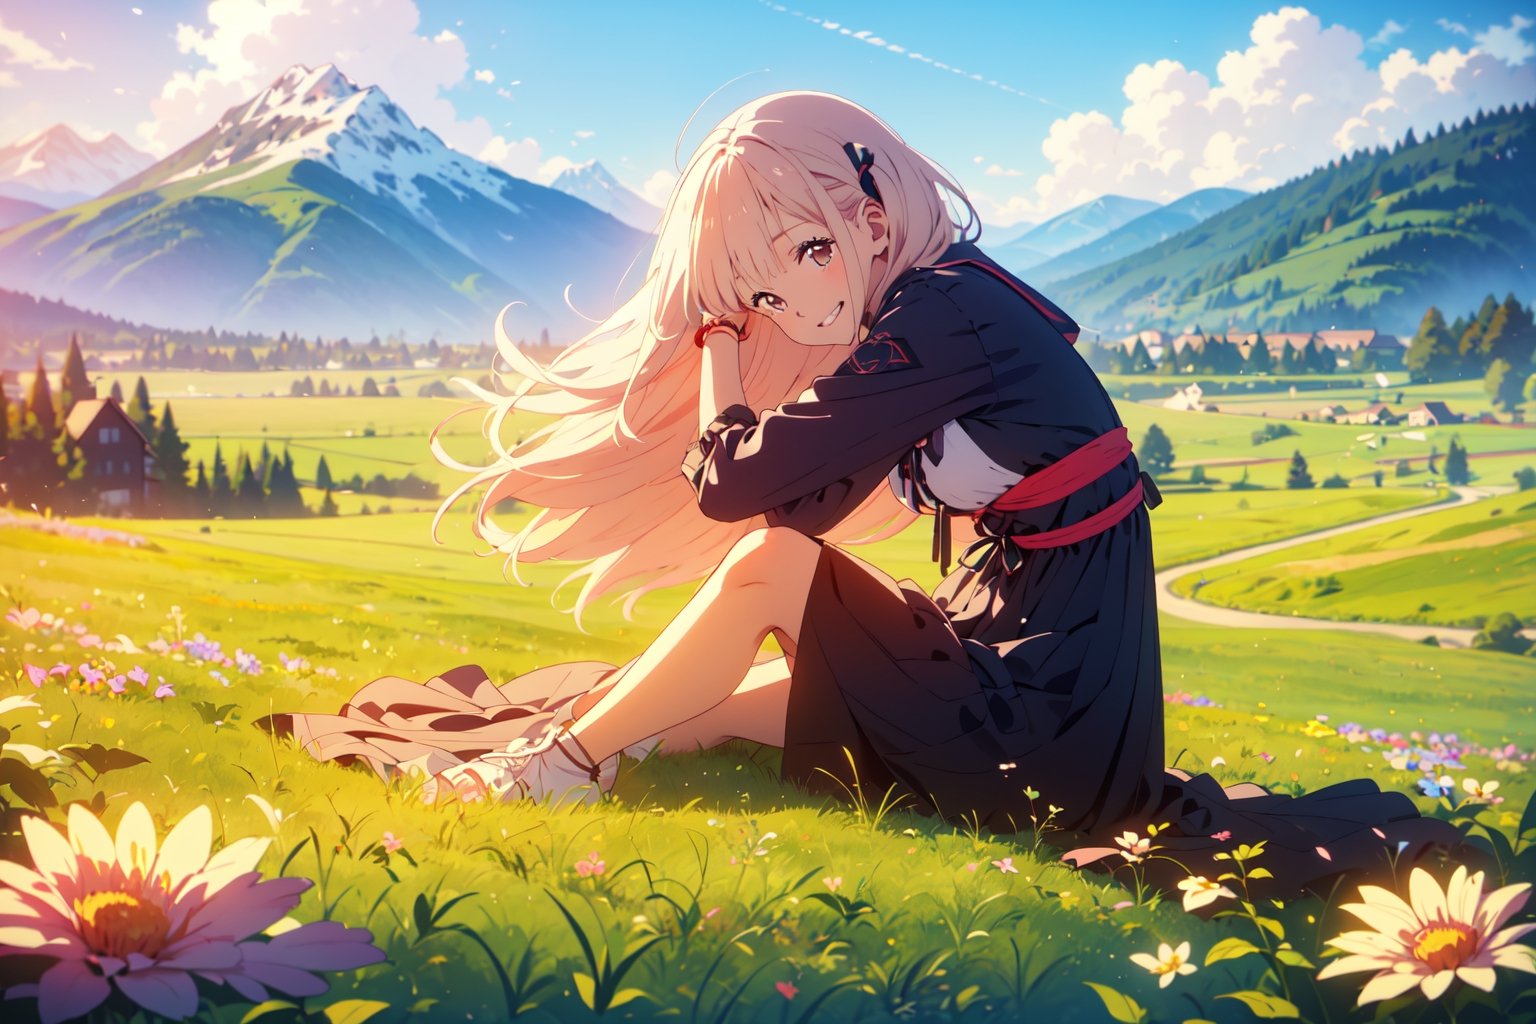 Under the blue sky, the young girl gracefully sat down on the lush grass.smile,The wind is blowing,A field of spring flowers,Far in the distance, the Alps mountain range is visible,The wind makes the hair flutter,masterpiece, best quality, ridiculous, highest quality, stunning details, 8k, aesthetic, hold down my hair blowing in the wind with my hand,